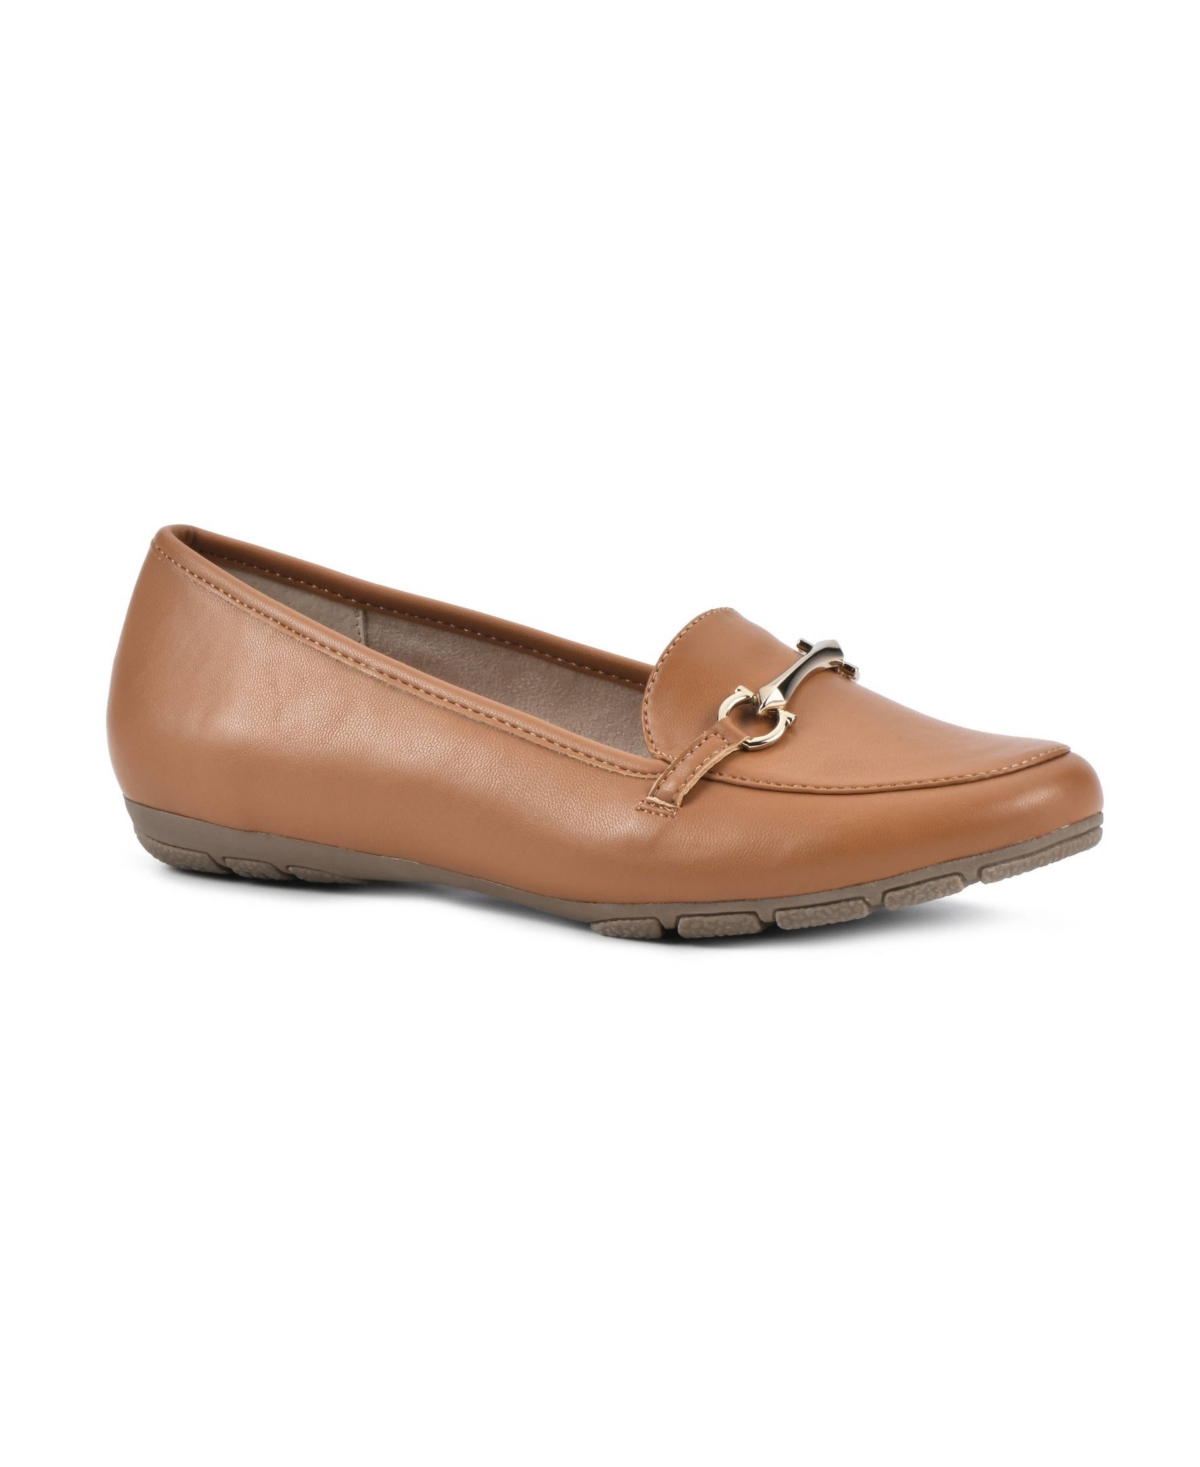 Cliffs by White Mountain Women's Glowing Loafer Flats Women's Shoes